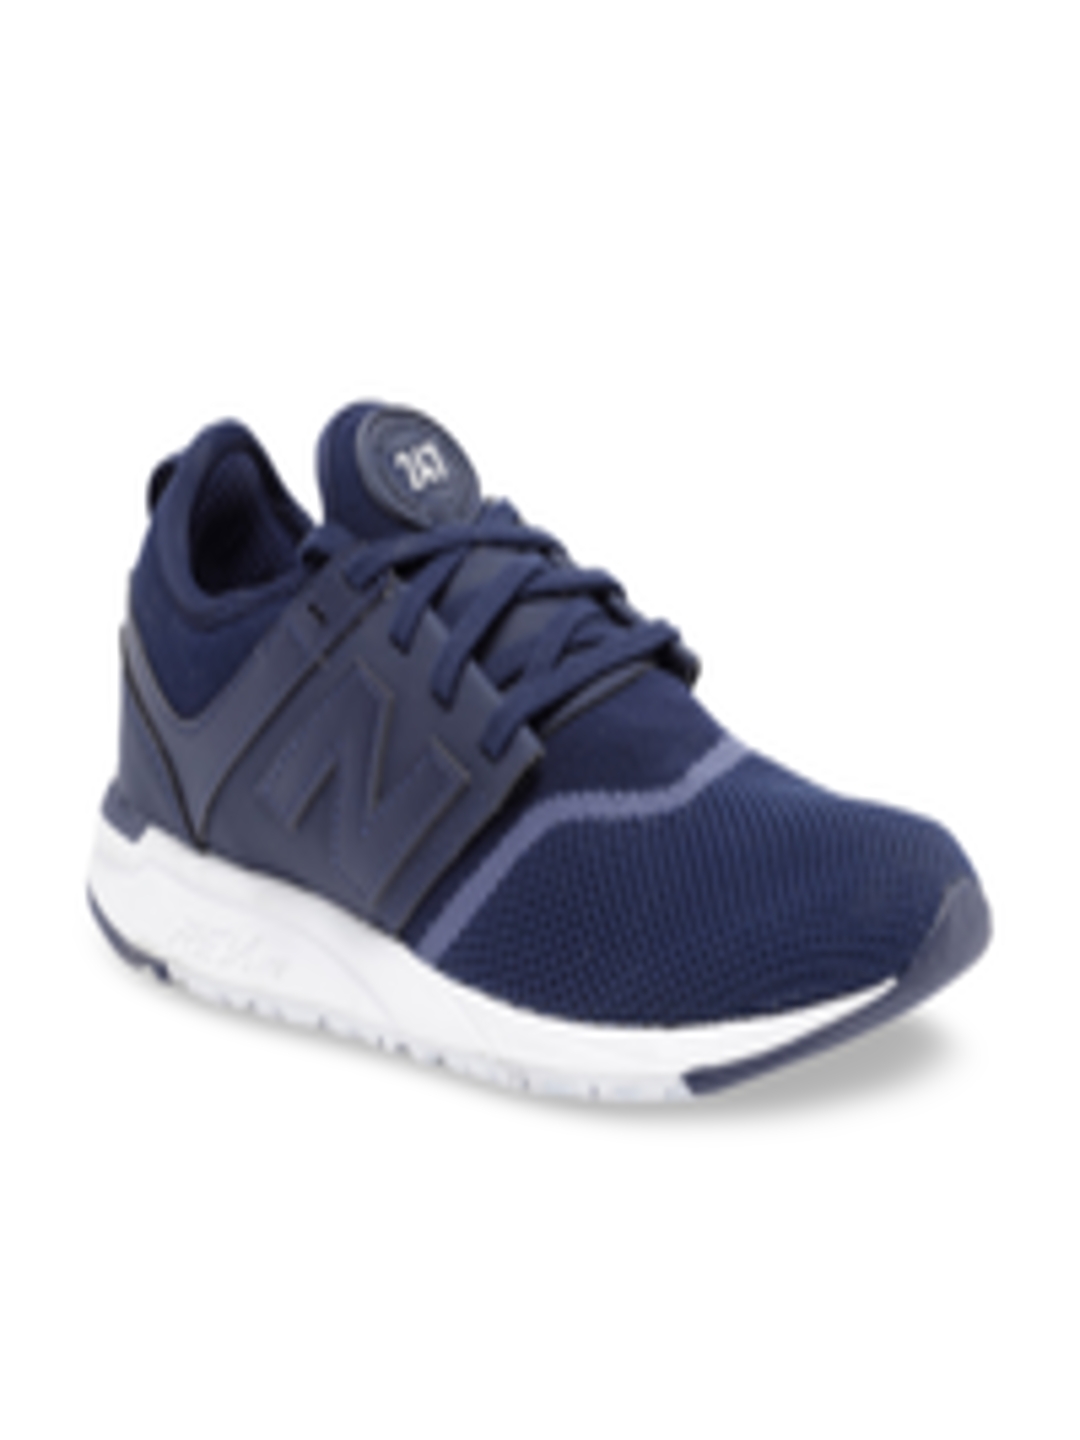 Buy New Balance Women Blue Woven Design Sneakers - Casual Shoes for ...